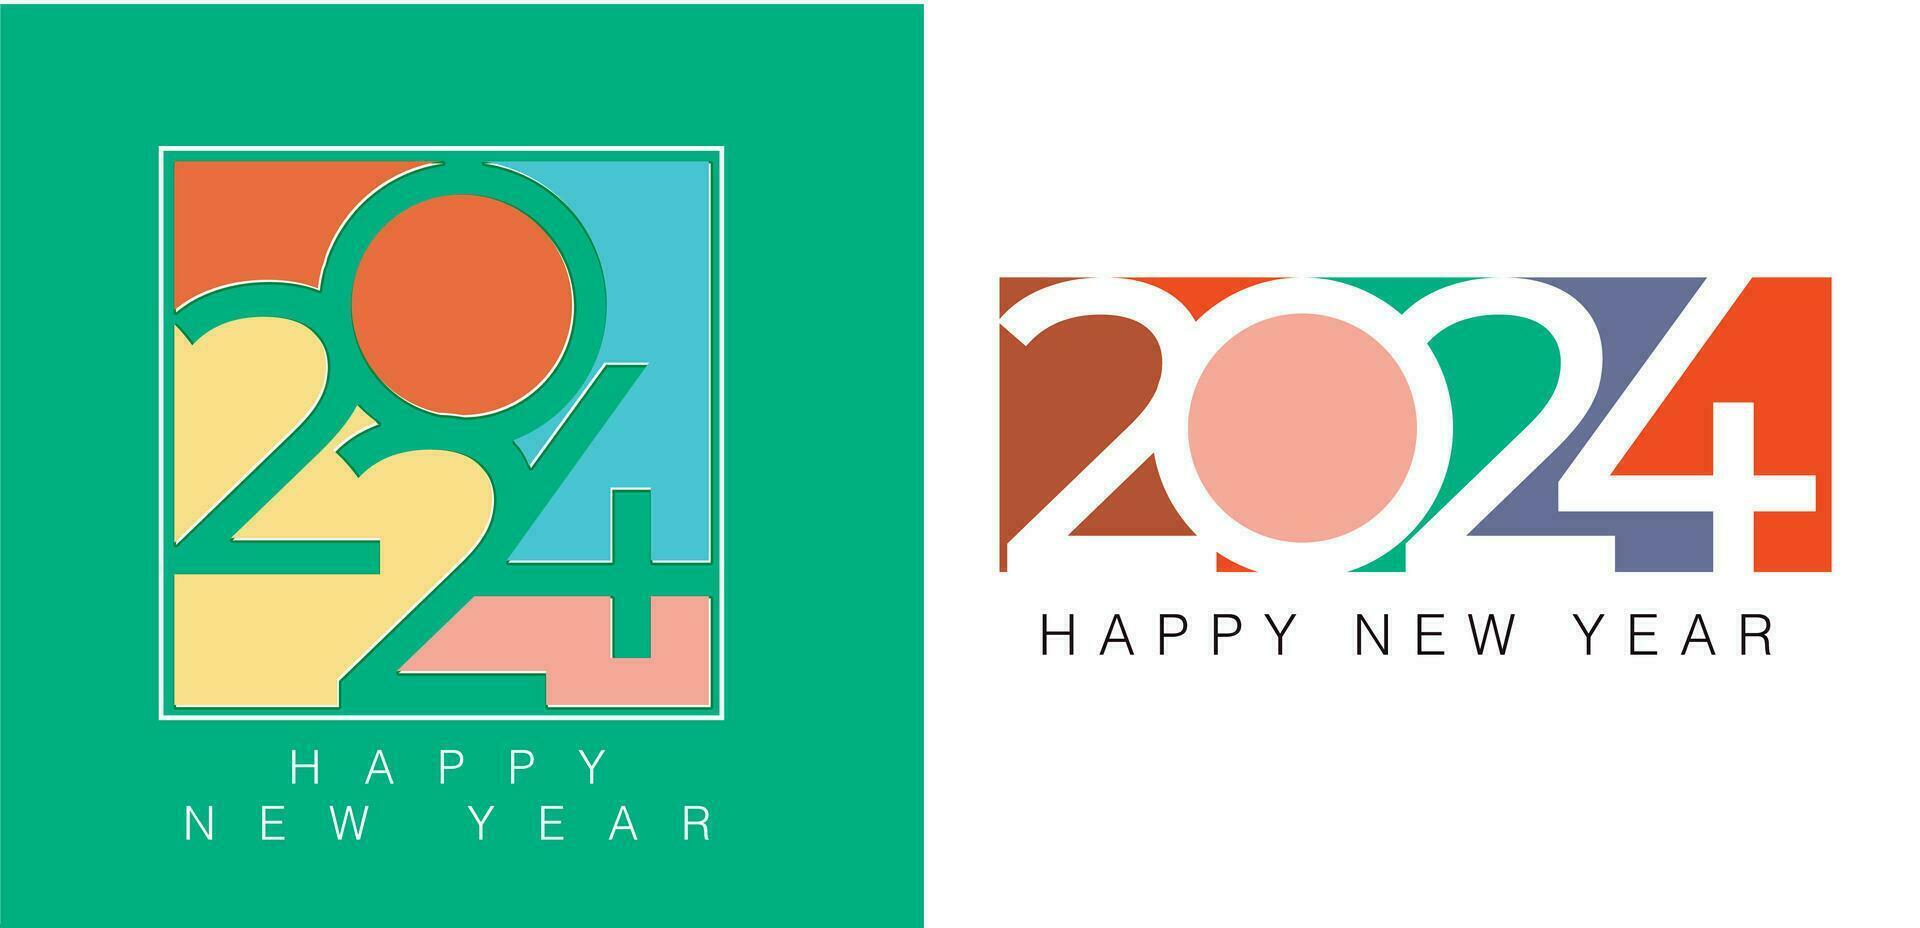 2024 typography logo design concept. Happy new year 2024 design. With colorful truncated number illustrations. Premium vector design for poster, banner, greeting and new year 2024 celebration